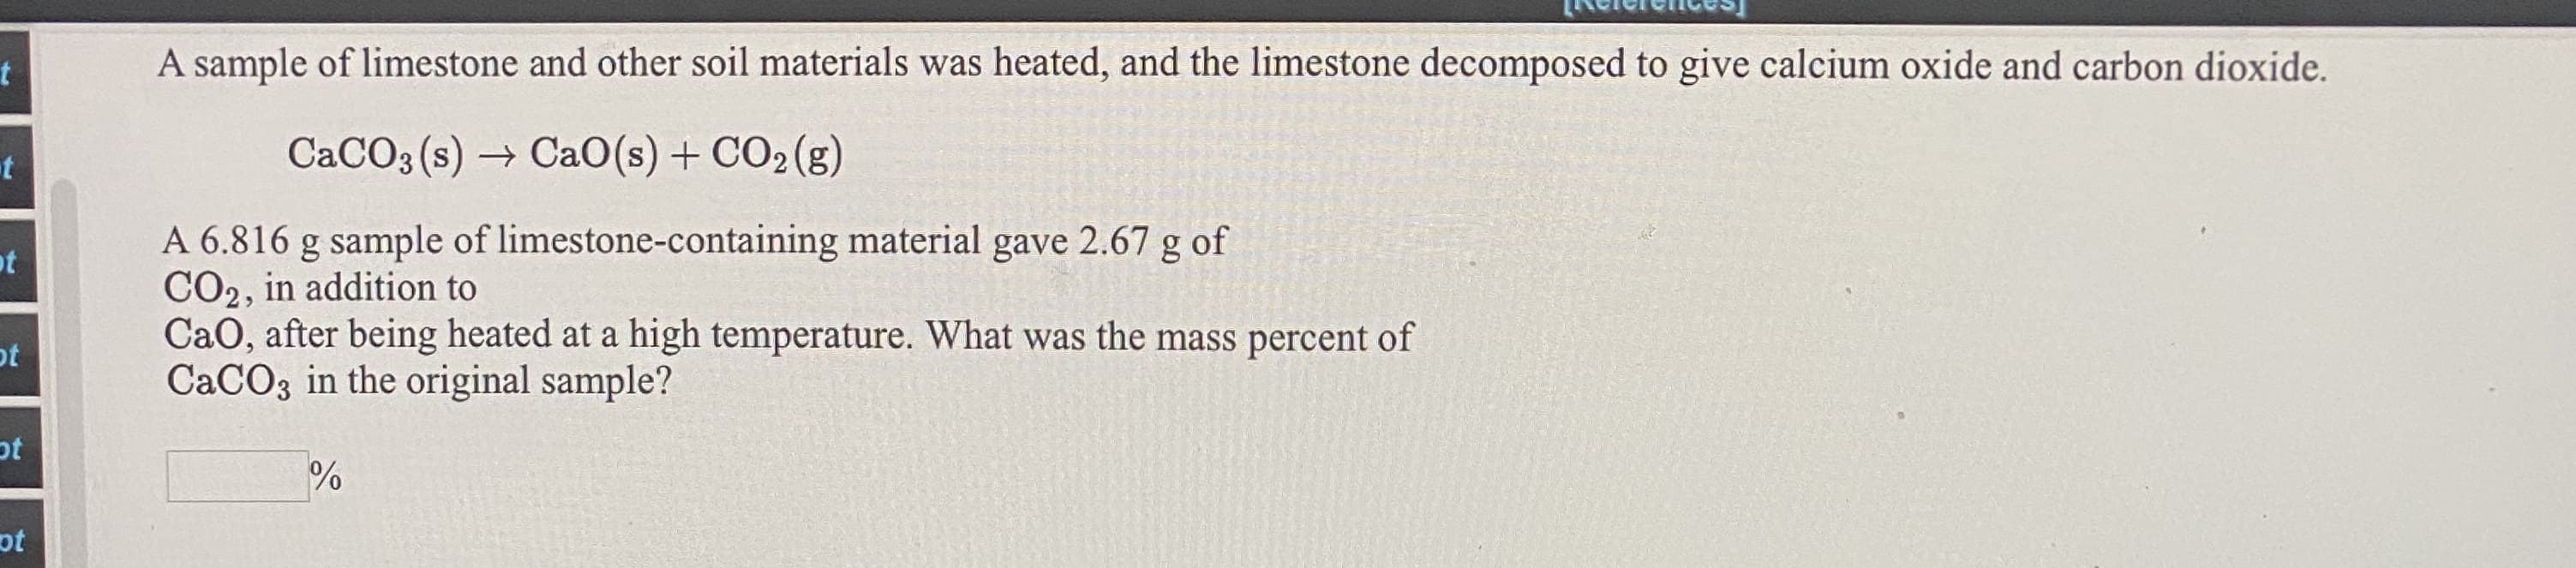 A sample of limestone and other soil materials was heated, and the limestone decomposed to give calcium oxide and carbon dioxide.
CACO3 (s) → CaO(s) + CO2 (g)
A 6.816 g sample of limestone-containing material gave 2.67 g of
CO2, in addition to
CaO, after being heated at a high temperature. What was the mass percent of
CACO3 in the original sample?
